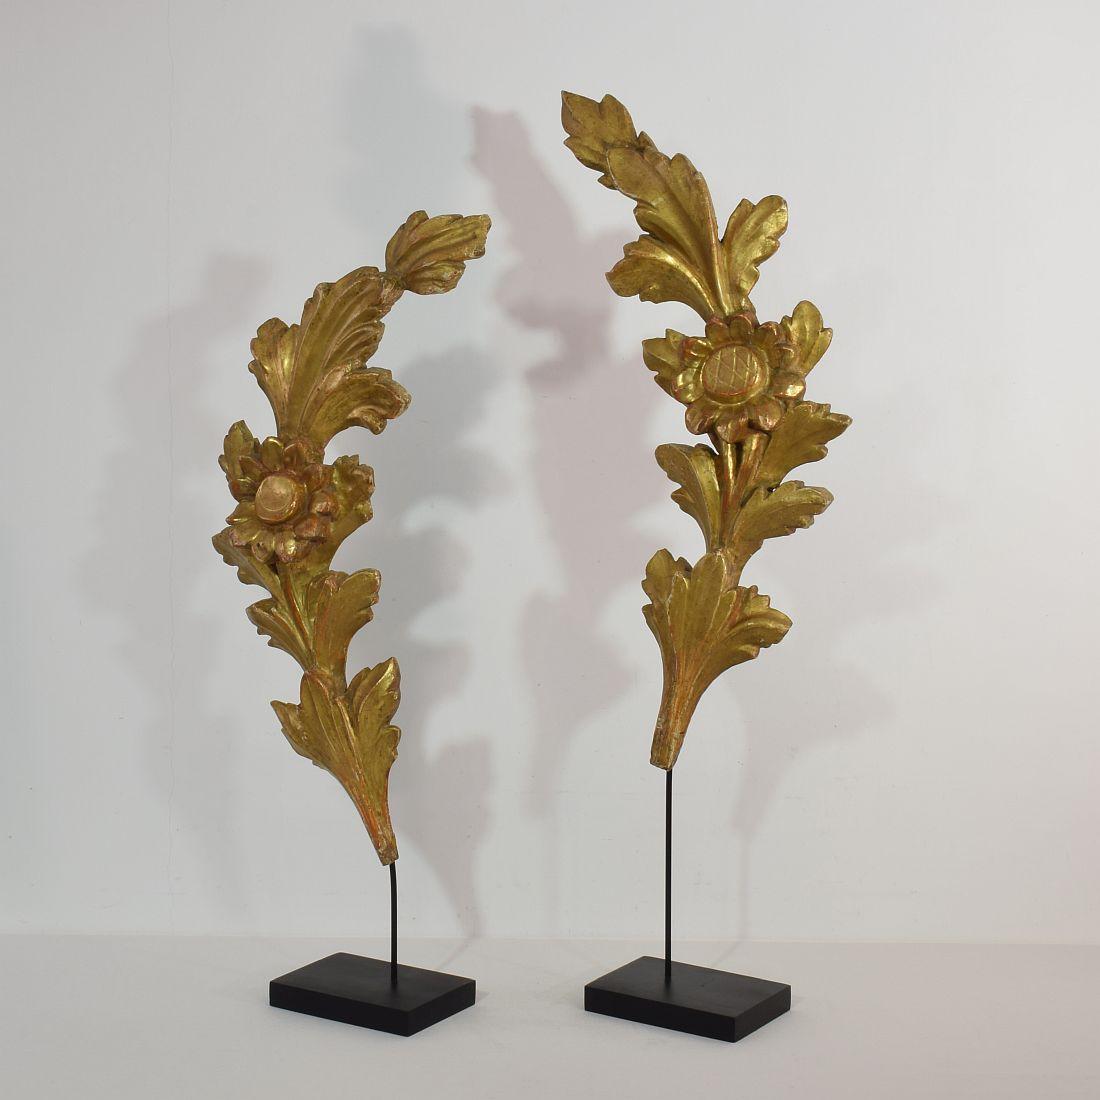 Nice couple of two large gilded Baroque wooden ornaments,
Italy, circa 1750. Weathered, small losses. Measurement here below is of the largest and includes the wooden base.